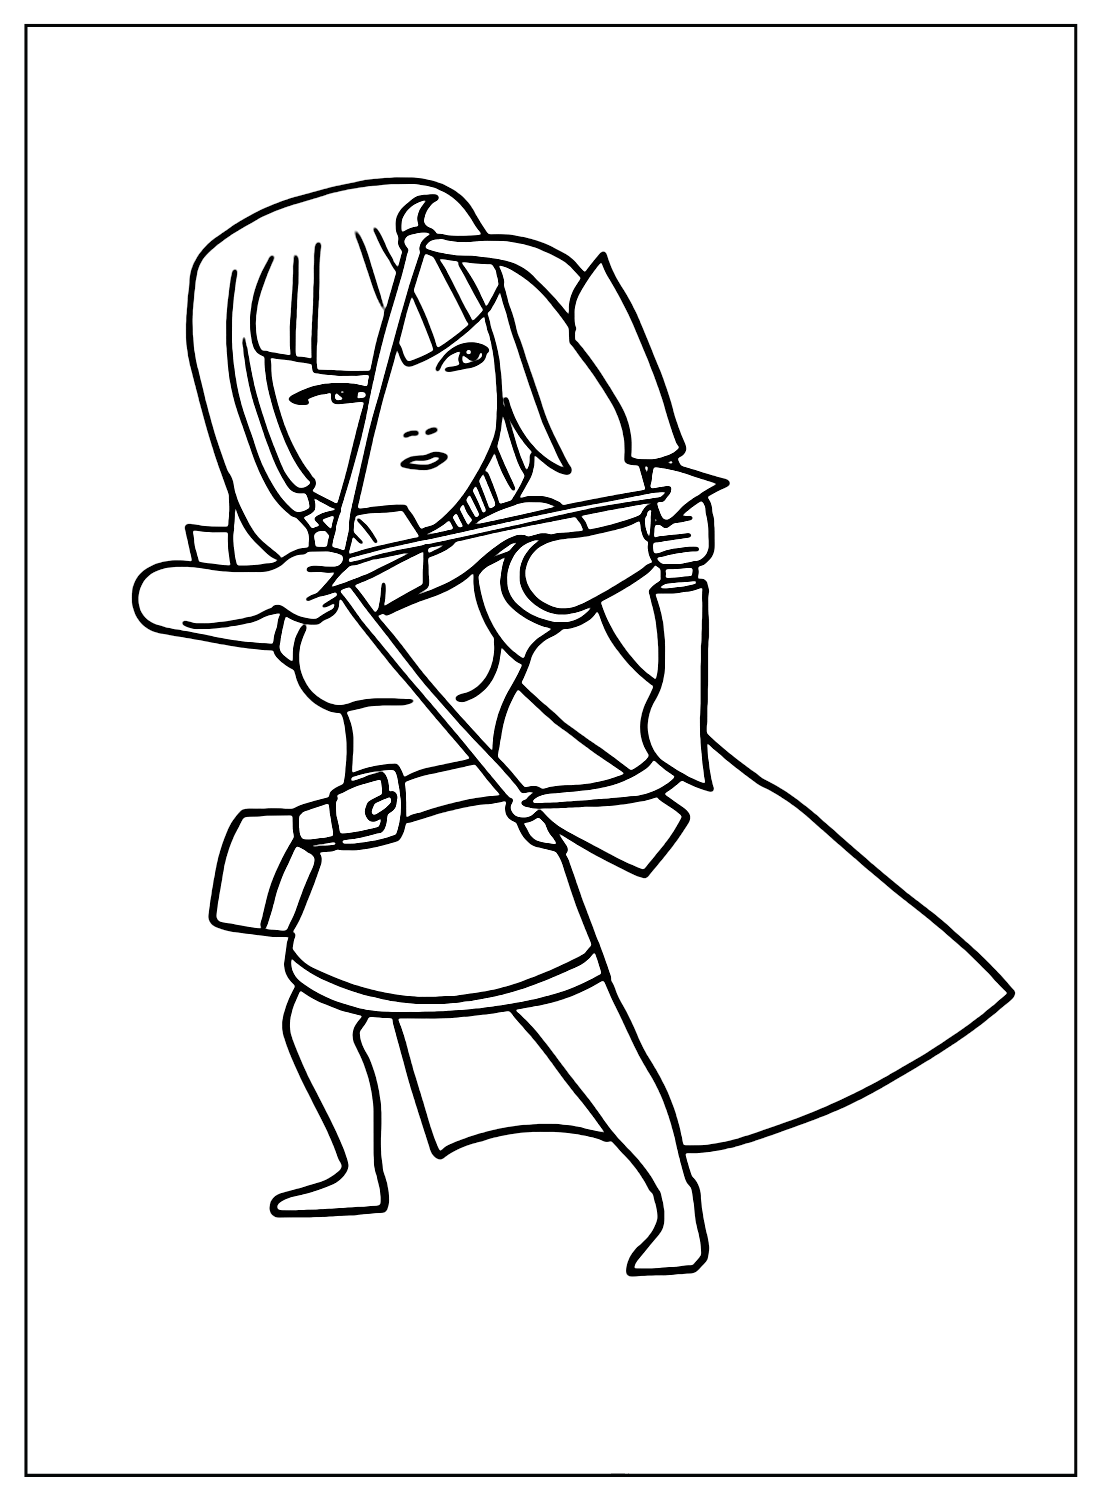 Clash of Clans Archer Coloring Pages from Clash of Clans